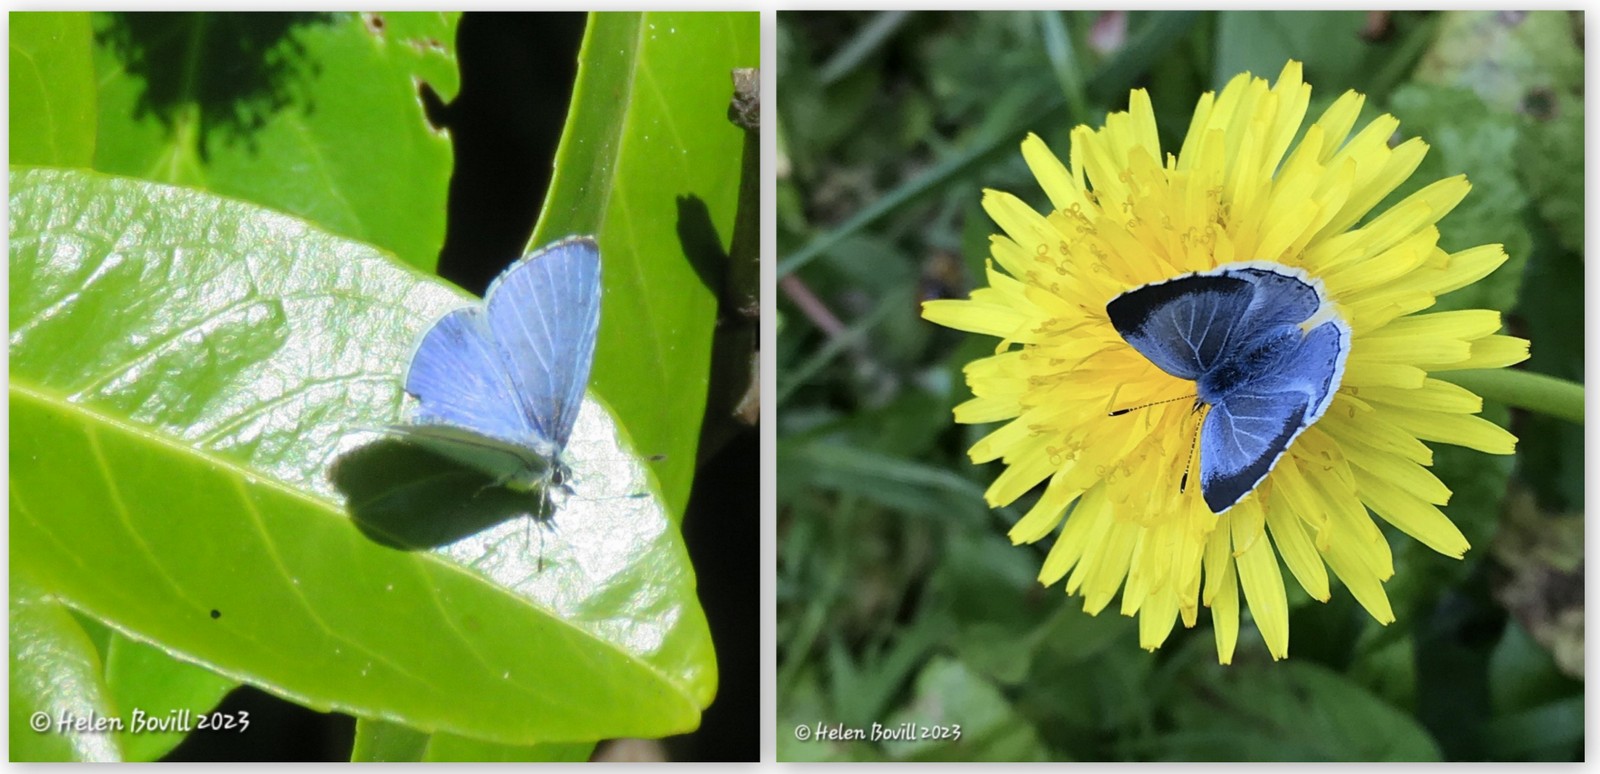 Two photos of a Holly Blue Butterfly - one showing the male and the other showing the female